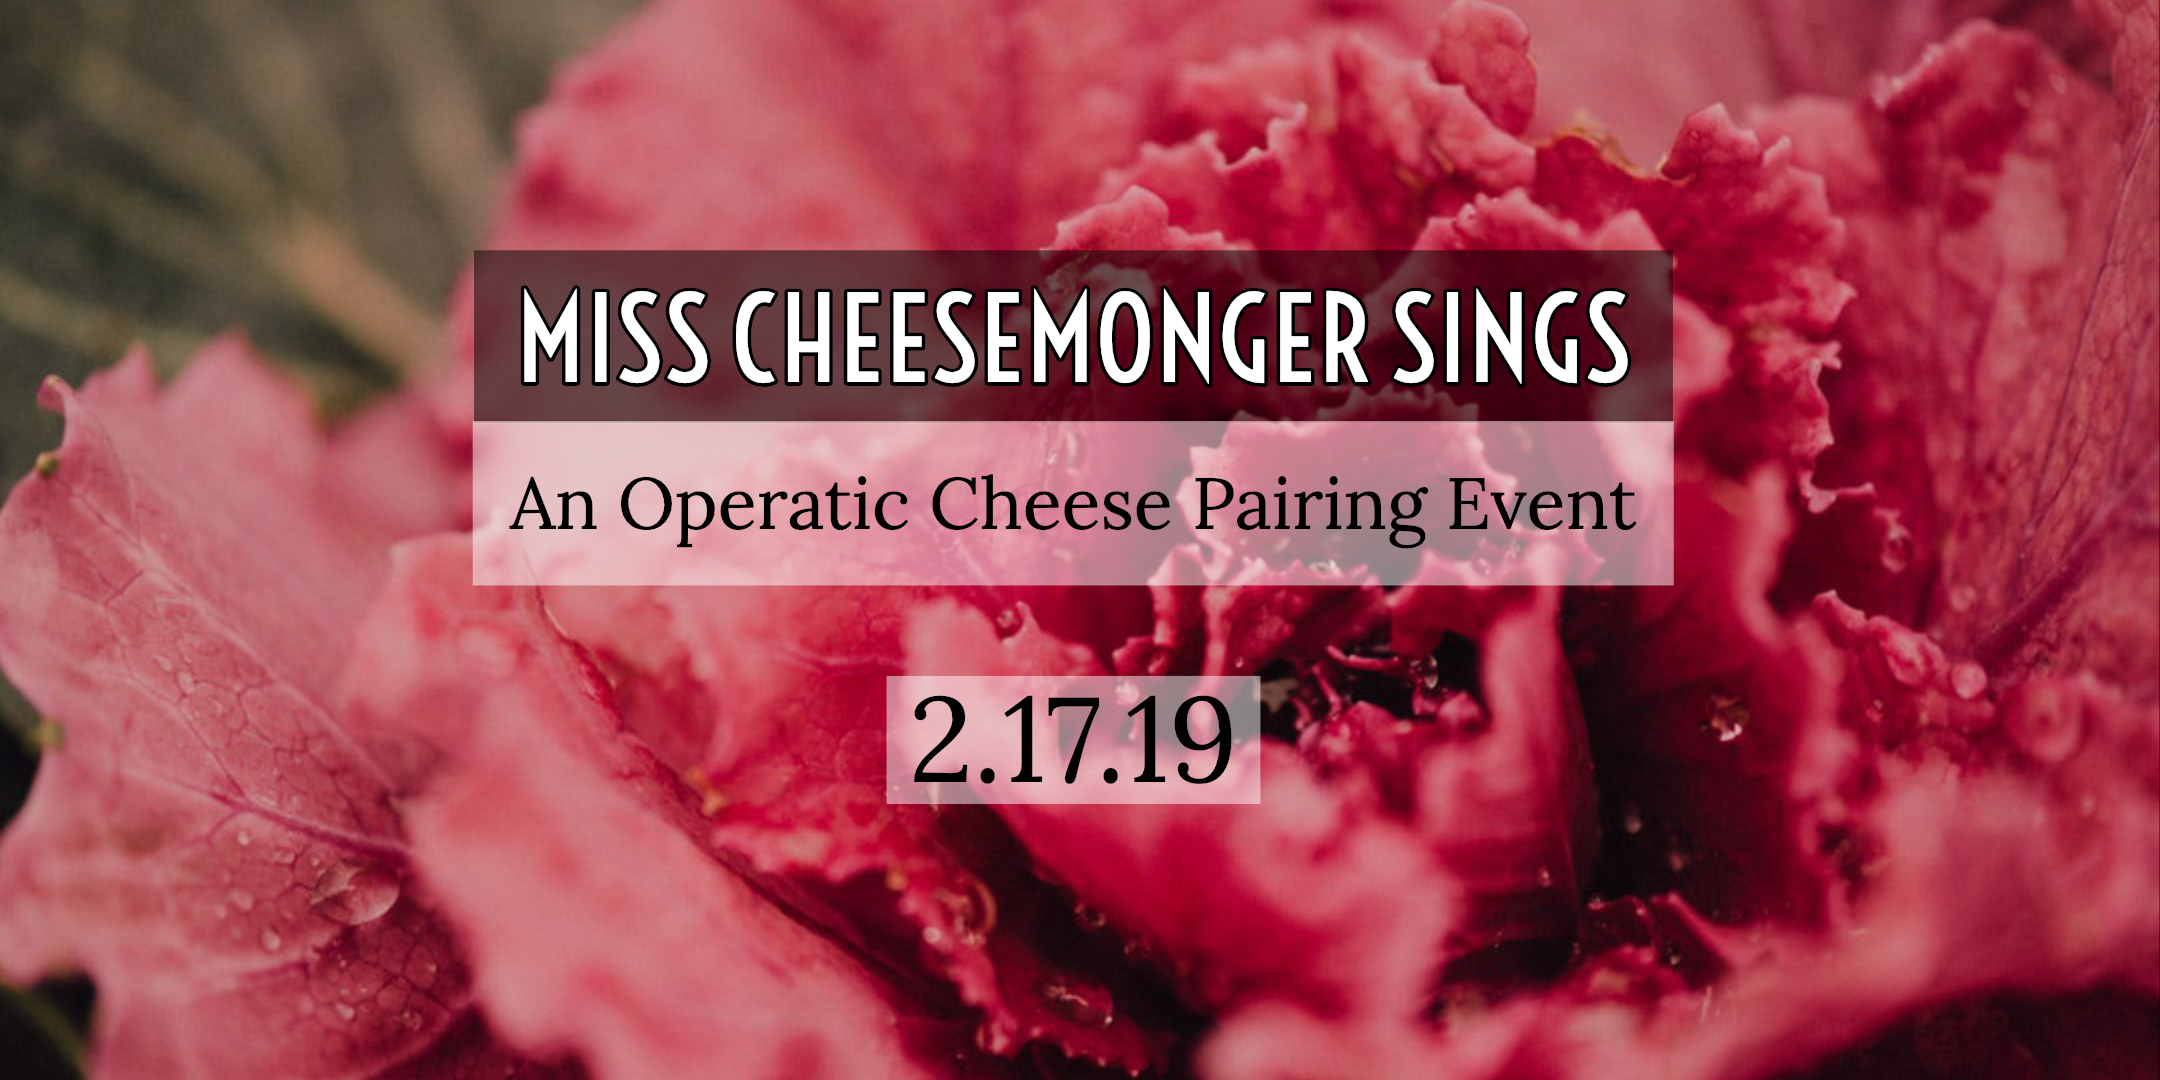 special events, san francisco, sf, events, cheese tasting, concert, classical music, voice, vocal music, opera